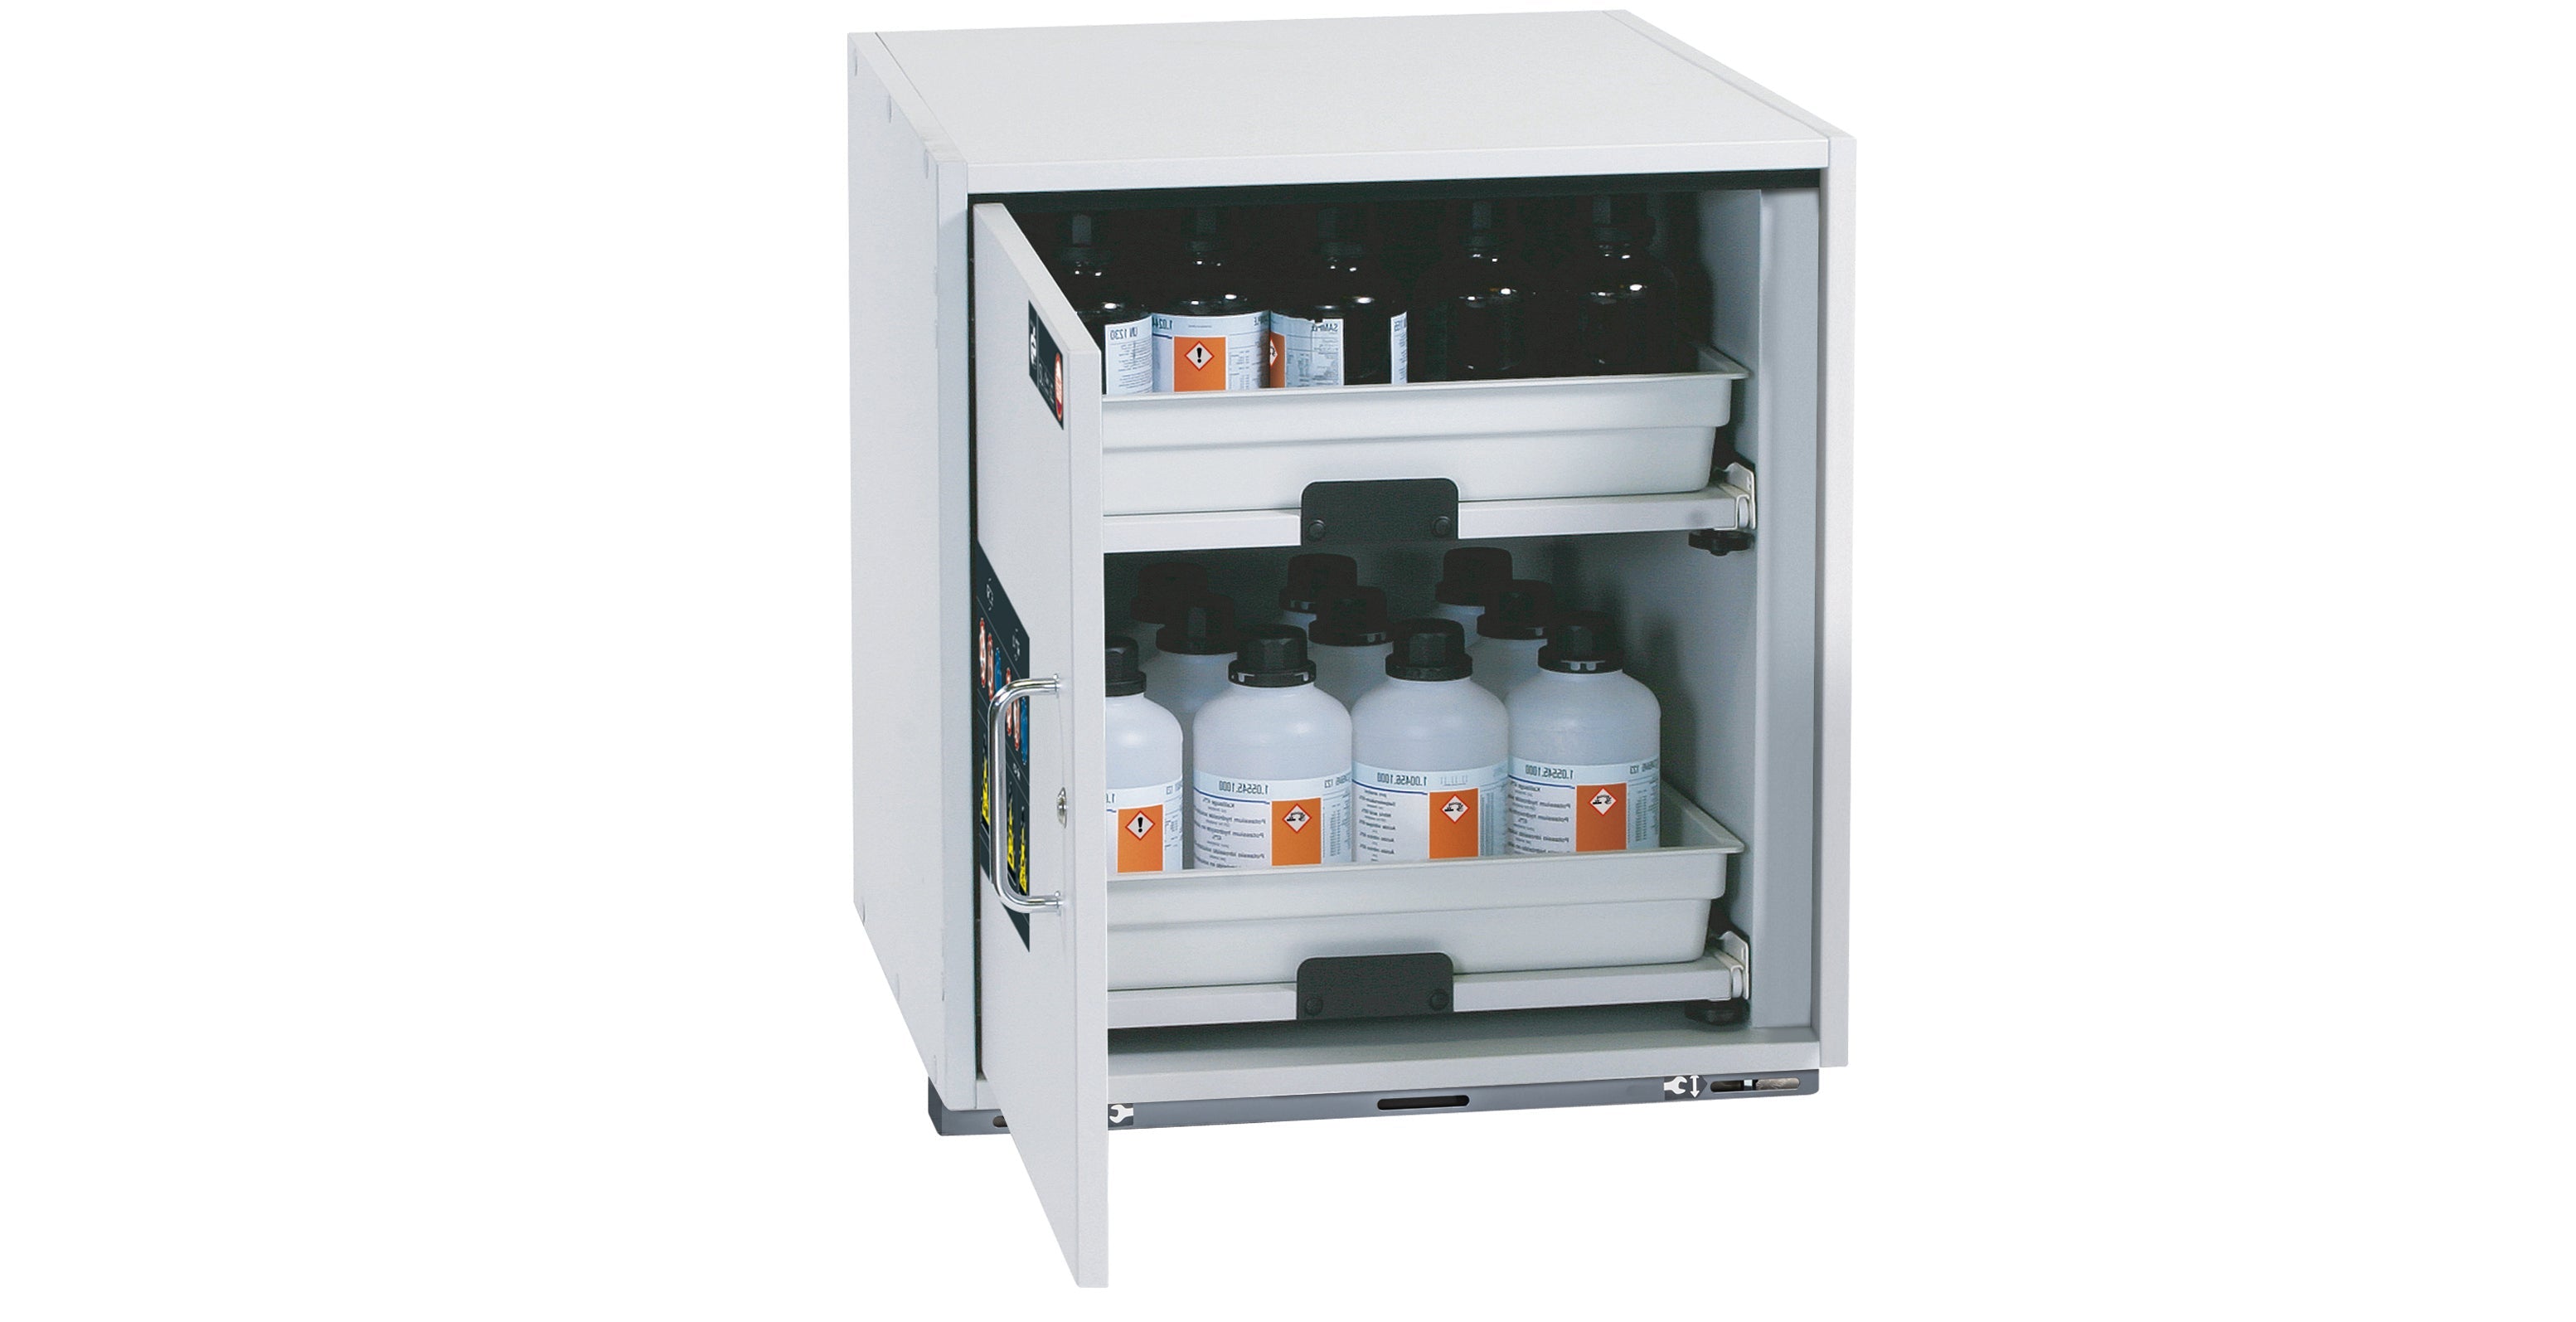 Acid and alkali base cabinet SL-CLASSIC-UB model SL.060.059.UB.T in light gray with 2x AbZ shelf pull-out (FP plate/polypropylene)